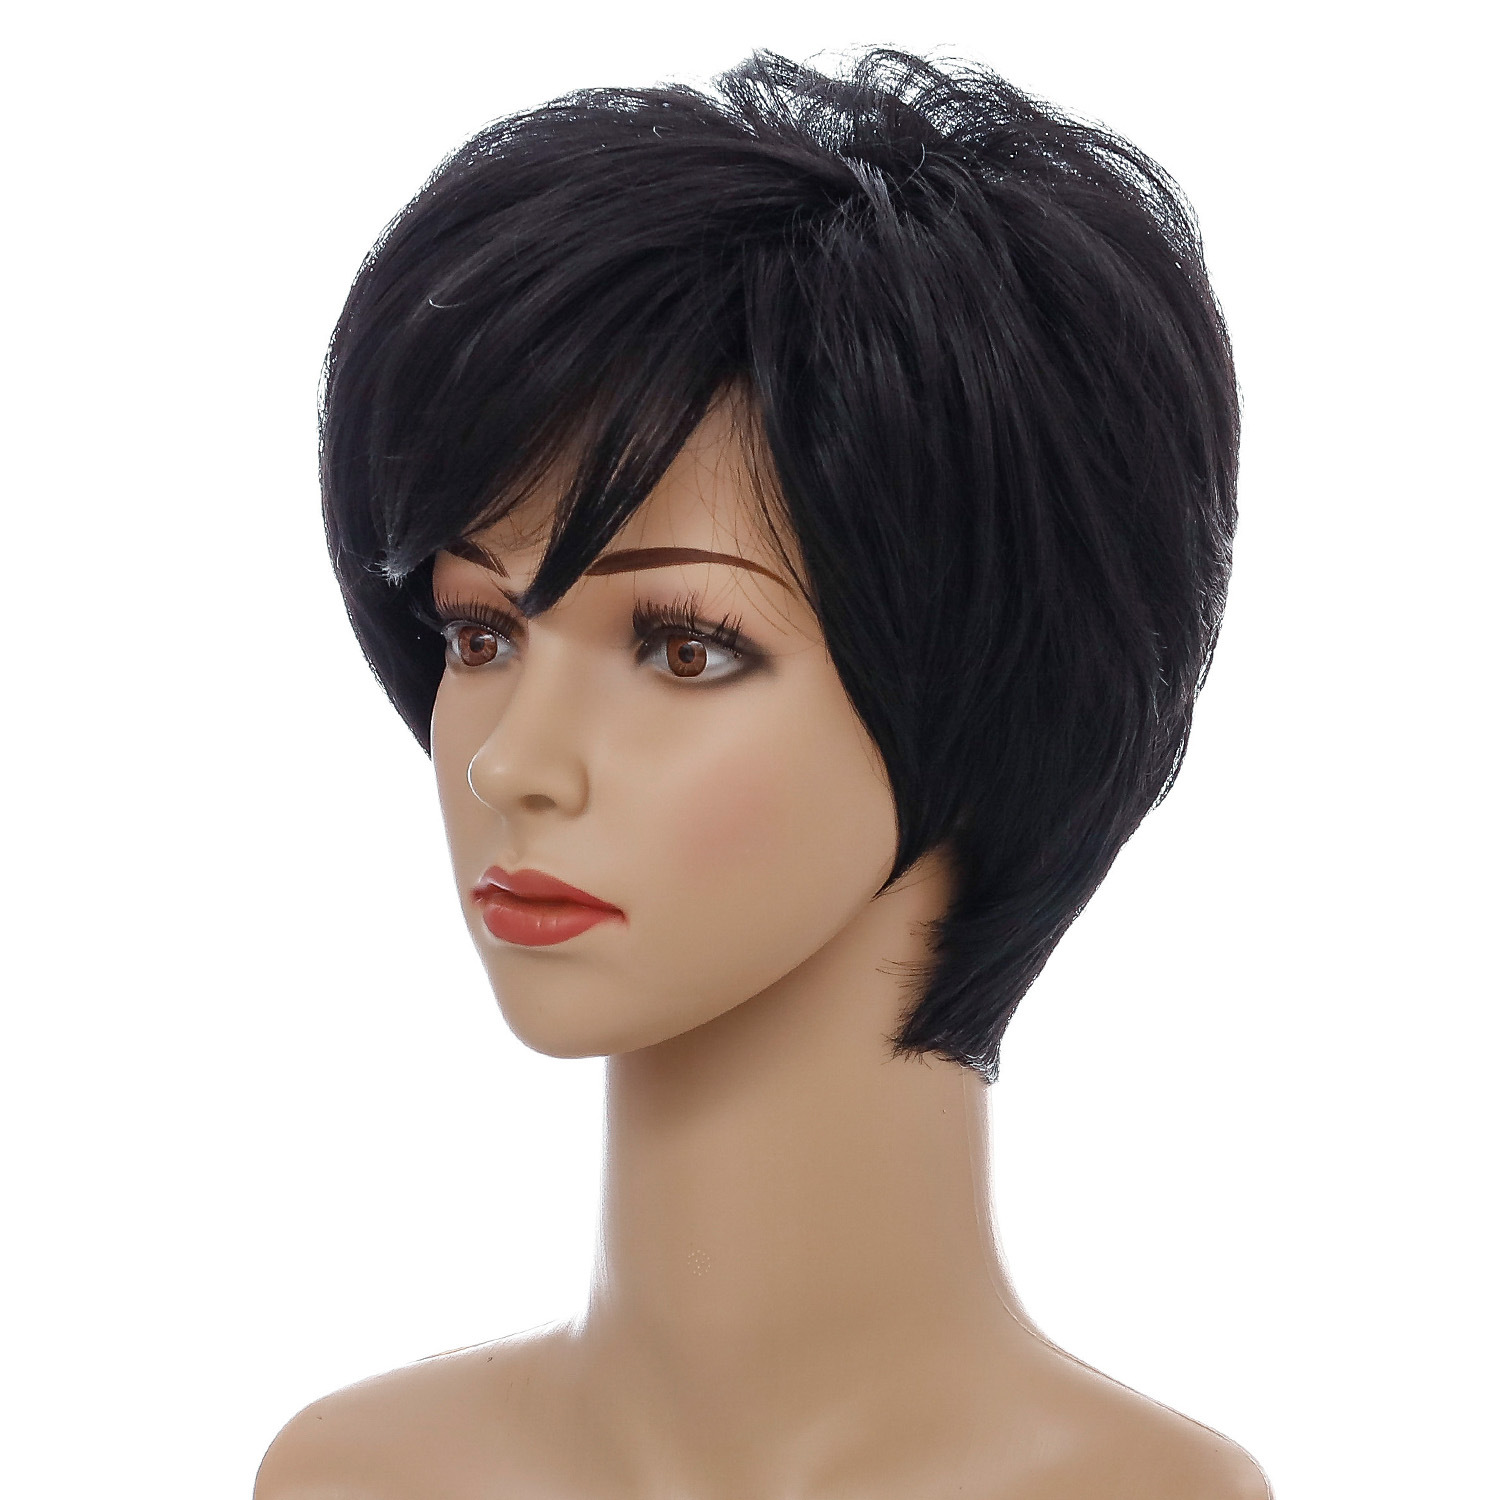 Chic black synthetic wig with short straight hair, designed for a stylish look